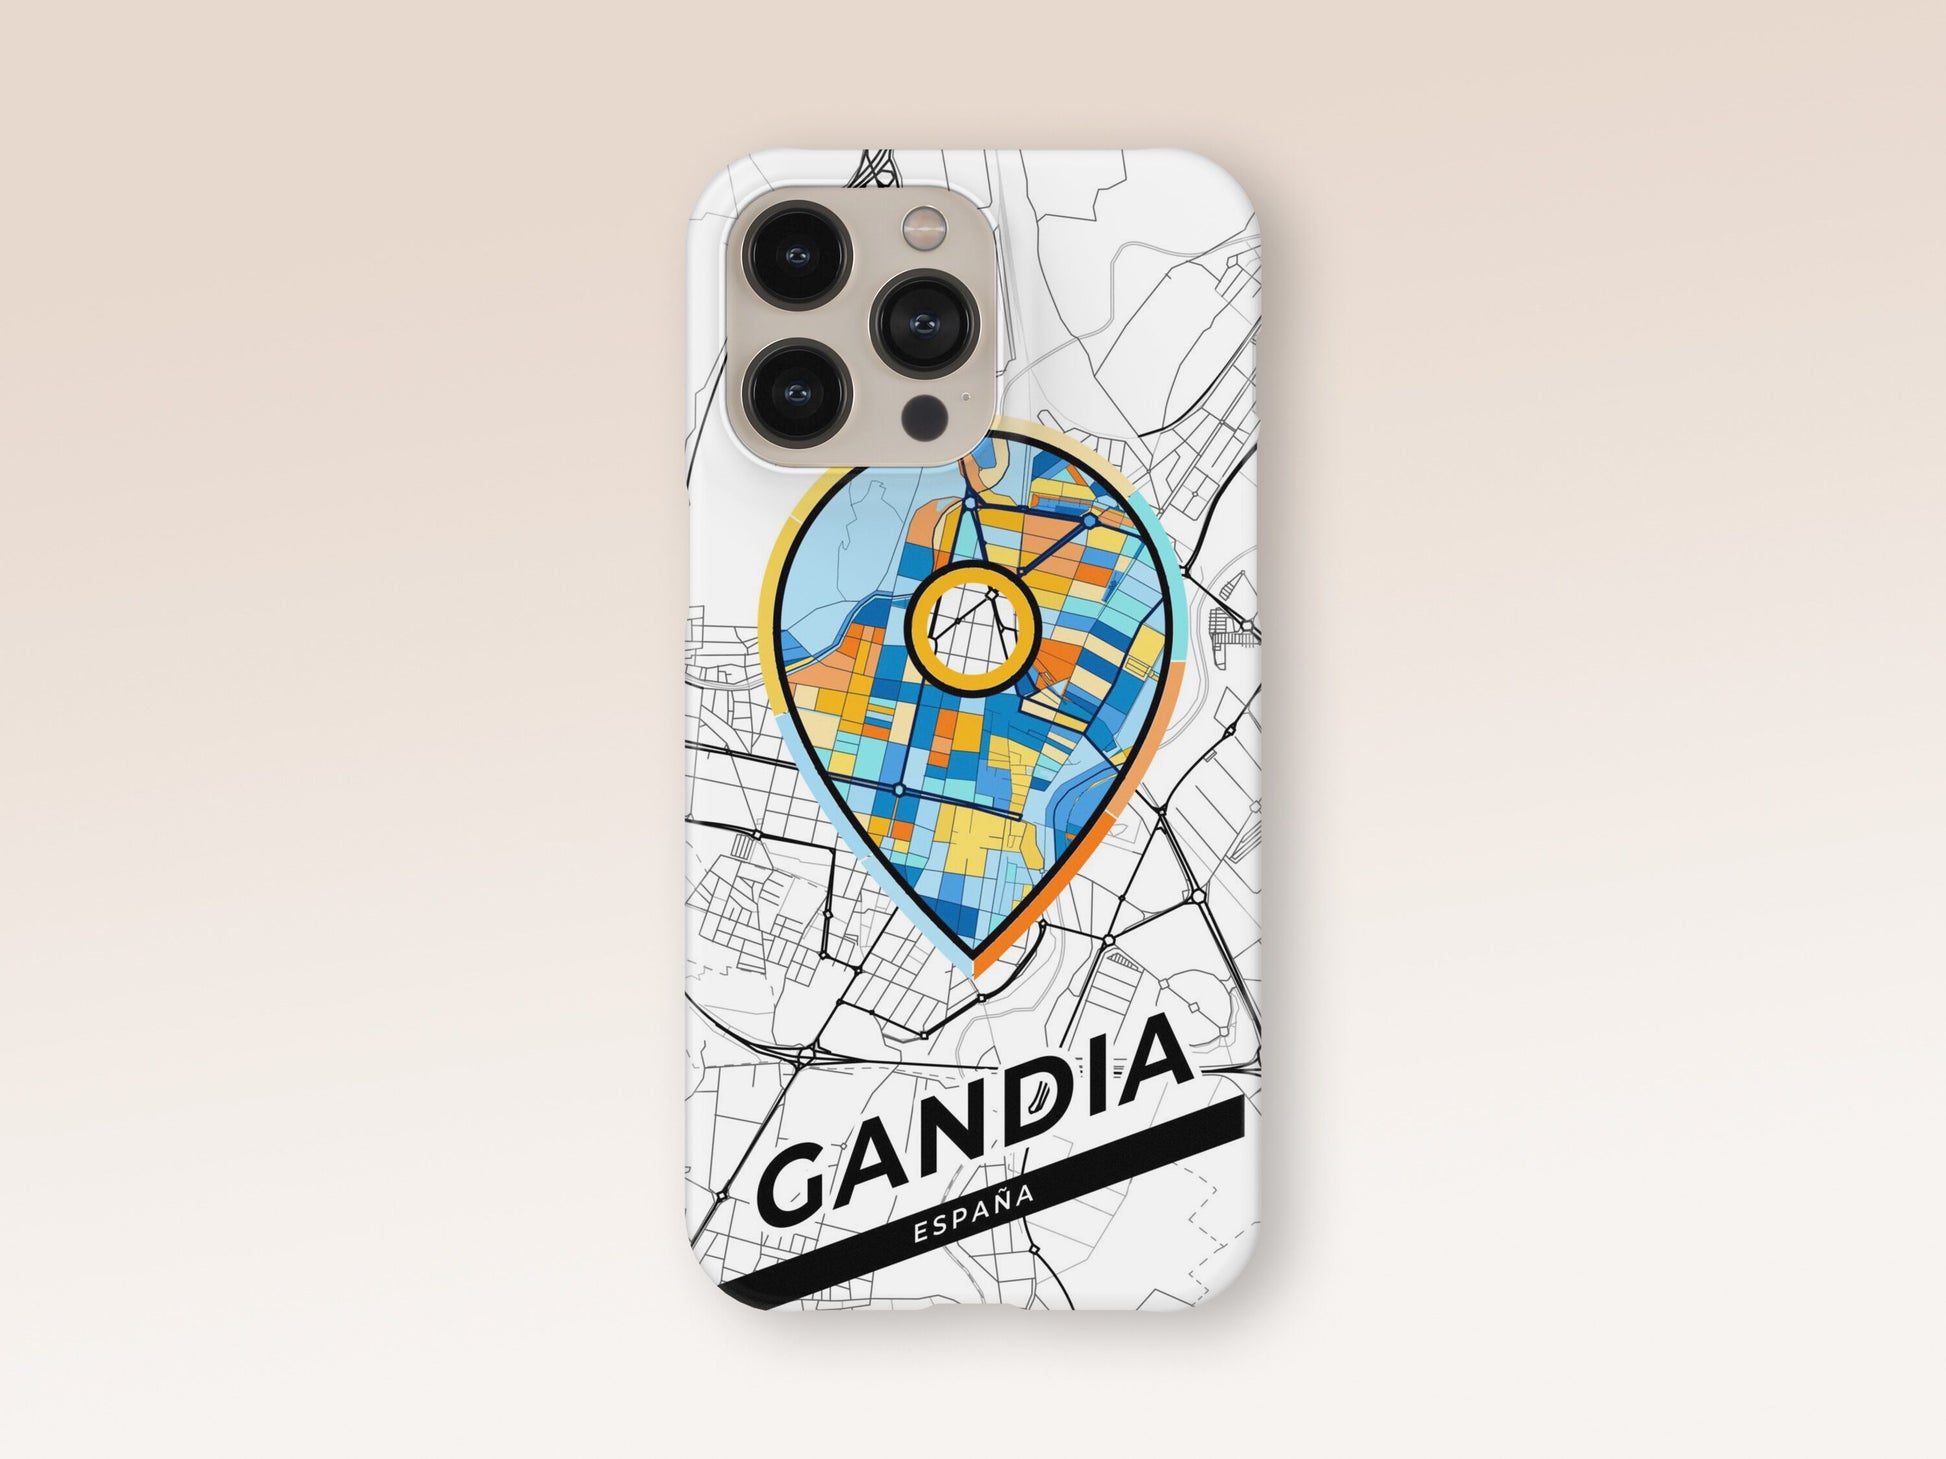 Gandia Spain slim phone case with colorful icon. Birthday, wedding or housewarming gift. Couple match cases. 1